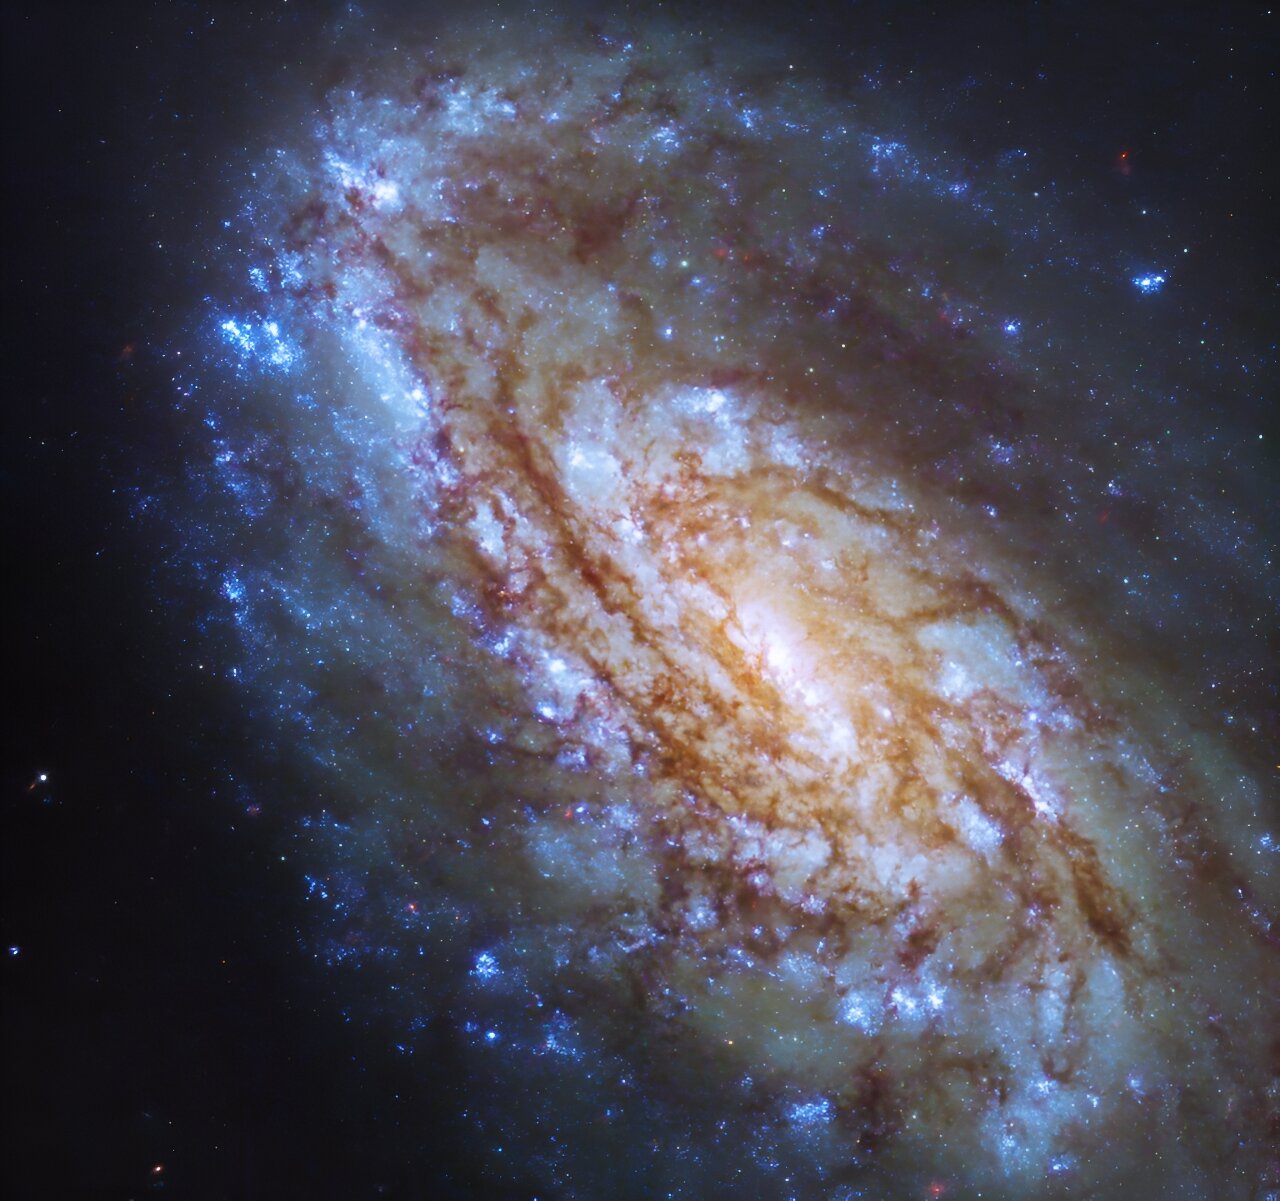 Stunning view of NGC 4654. Credit: NASA's Hubble Space Telescope, ESA, and J. Lee (Space Telescope Science Institute); Processing: Gladys Kober (NASA/Catholic University of America).